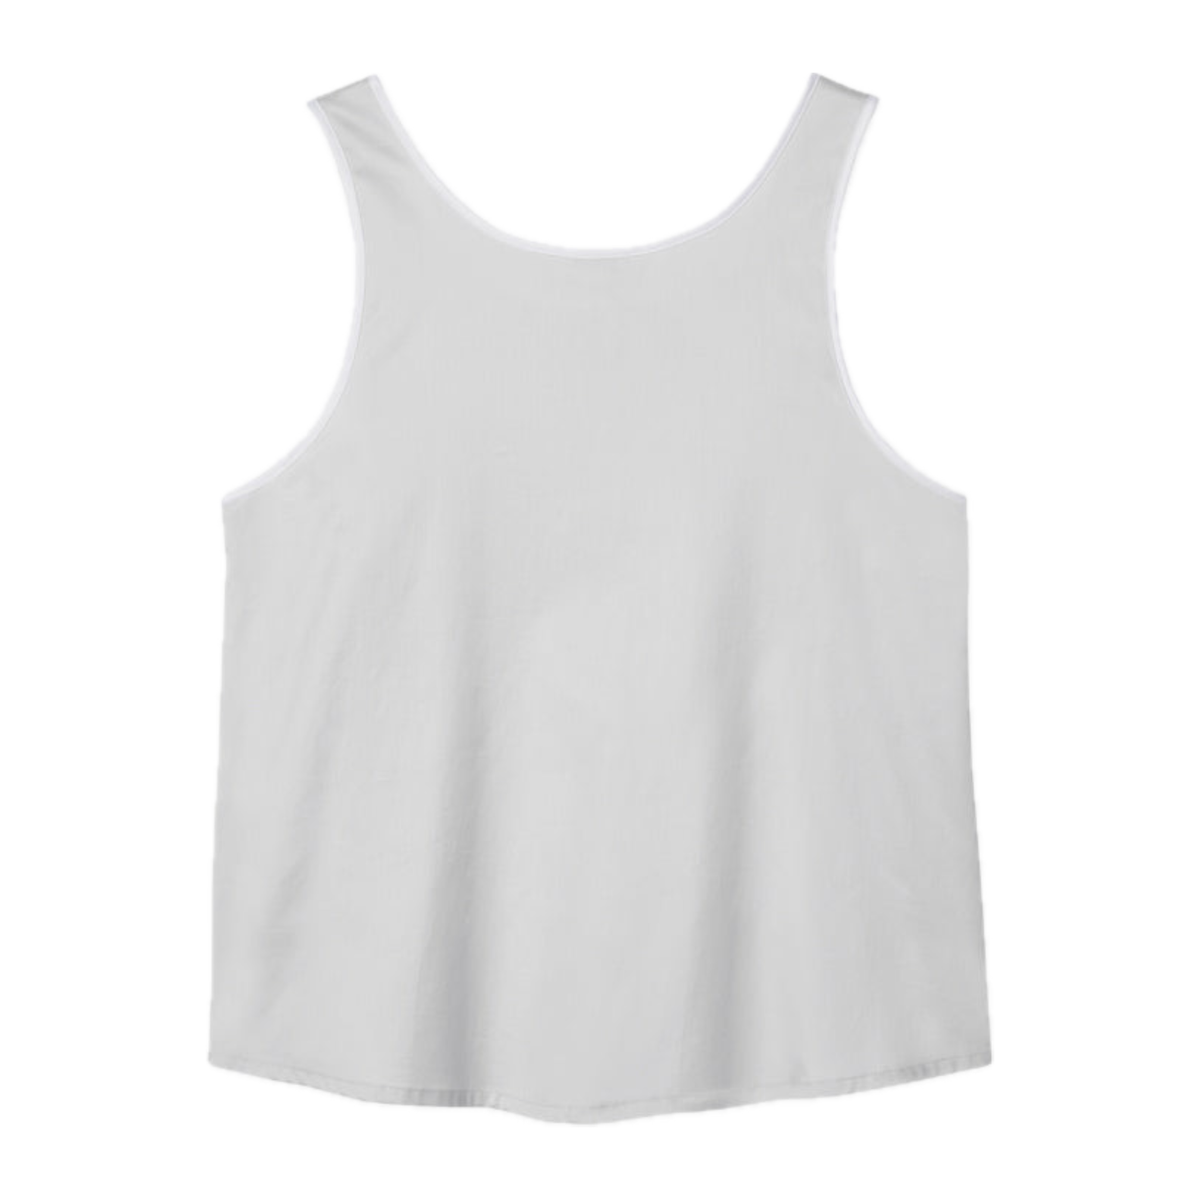 Back View of Tin Sferra Caricia Buttoned Tank Top against a white background